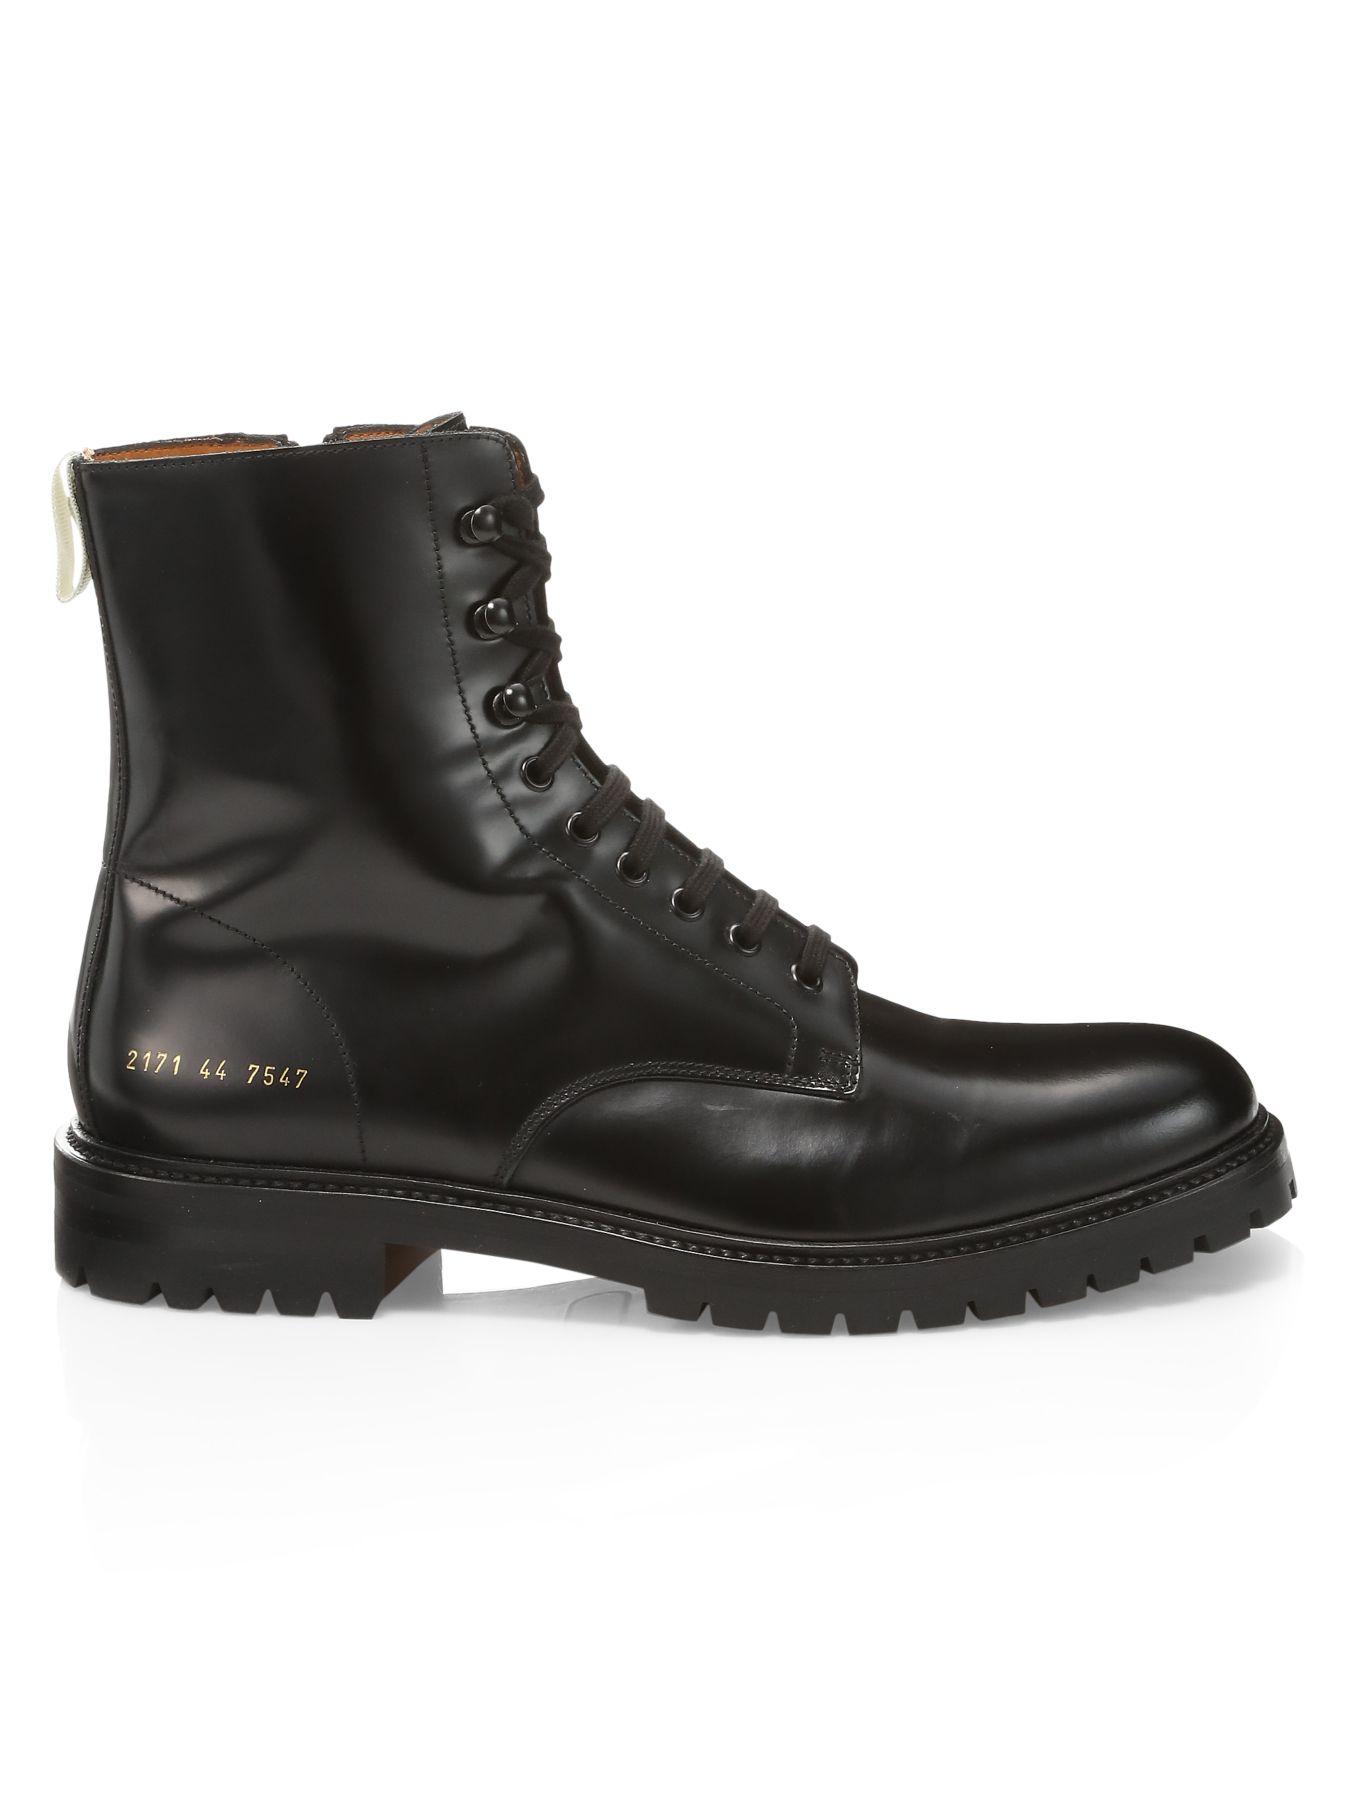 Common Projects Lug Sole Leather Combat Boots in Black for Men - Lyst